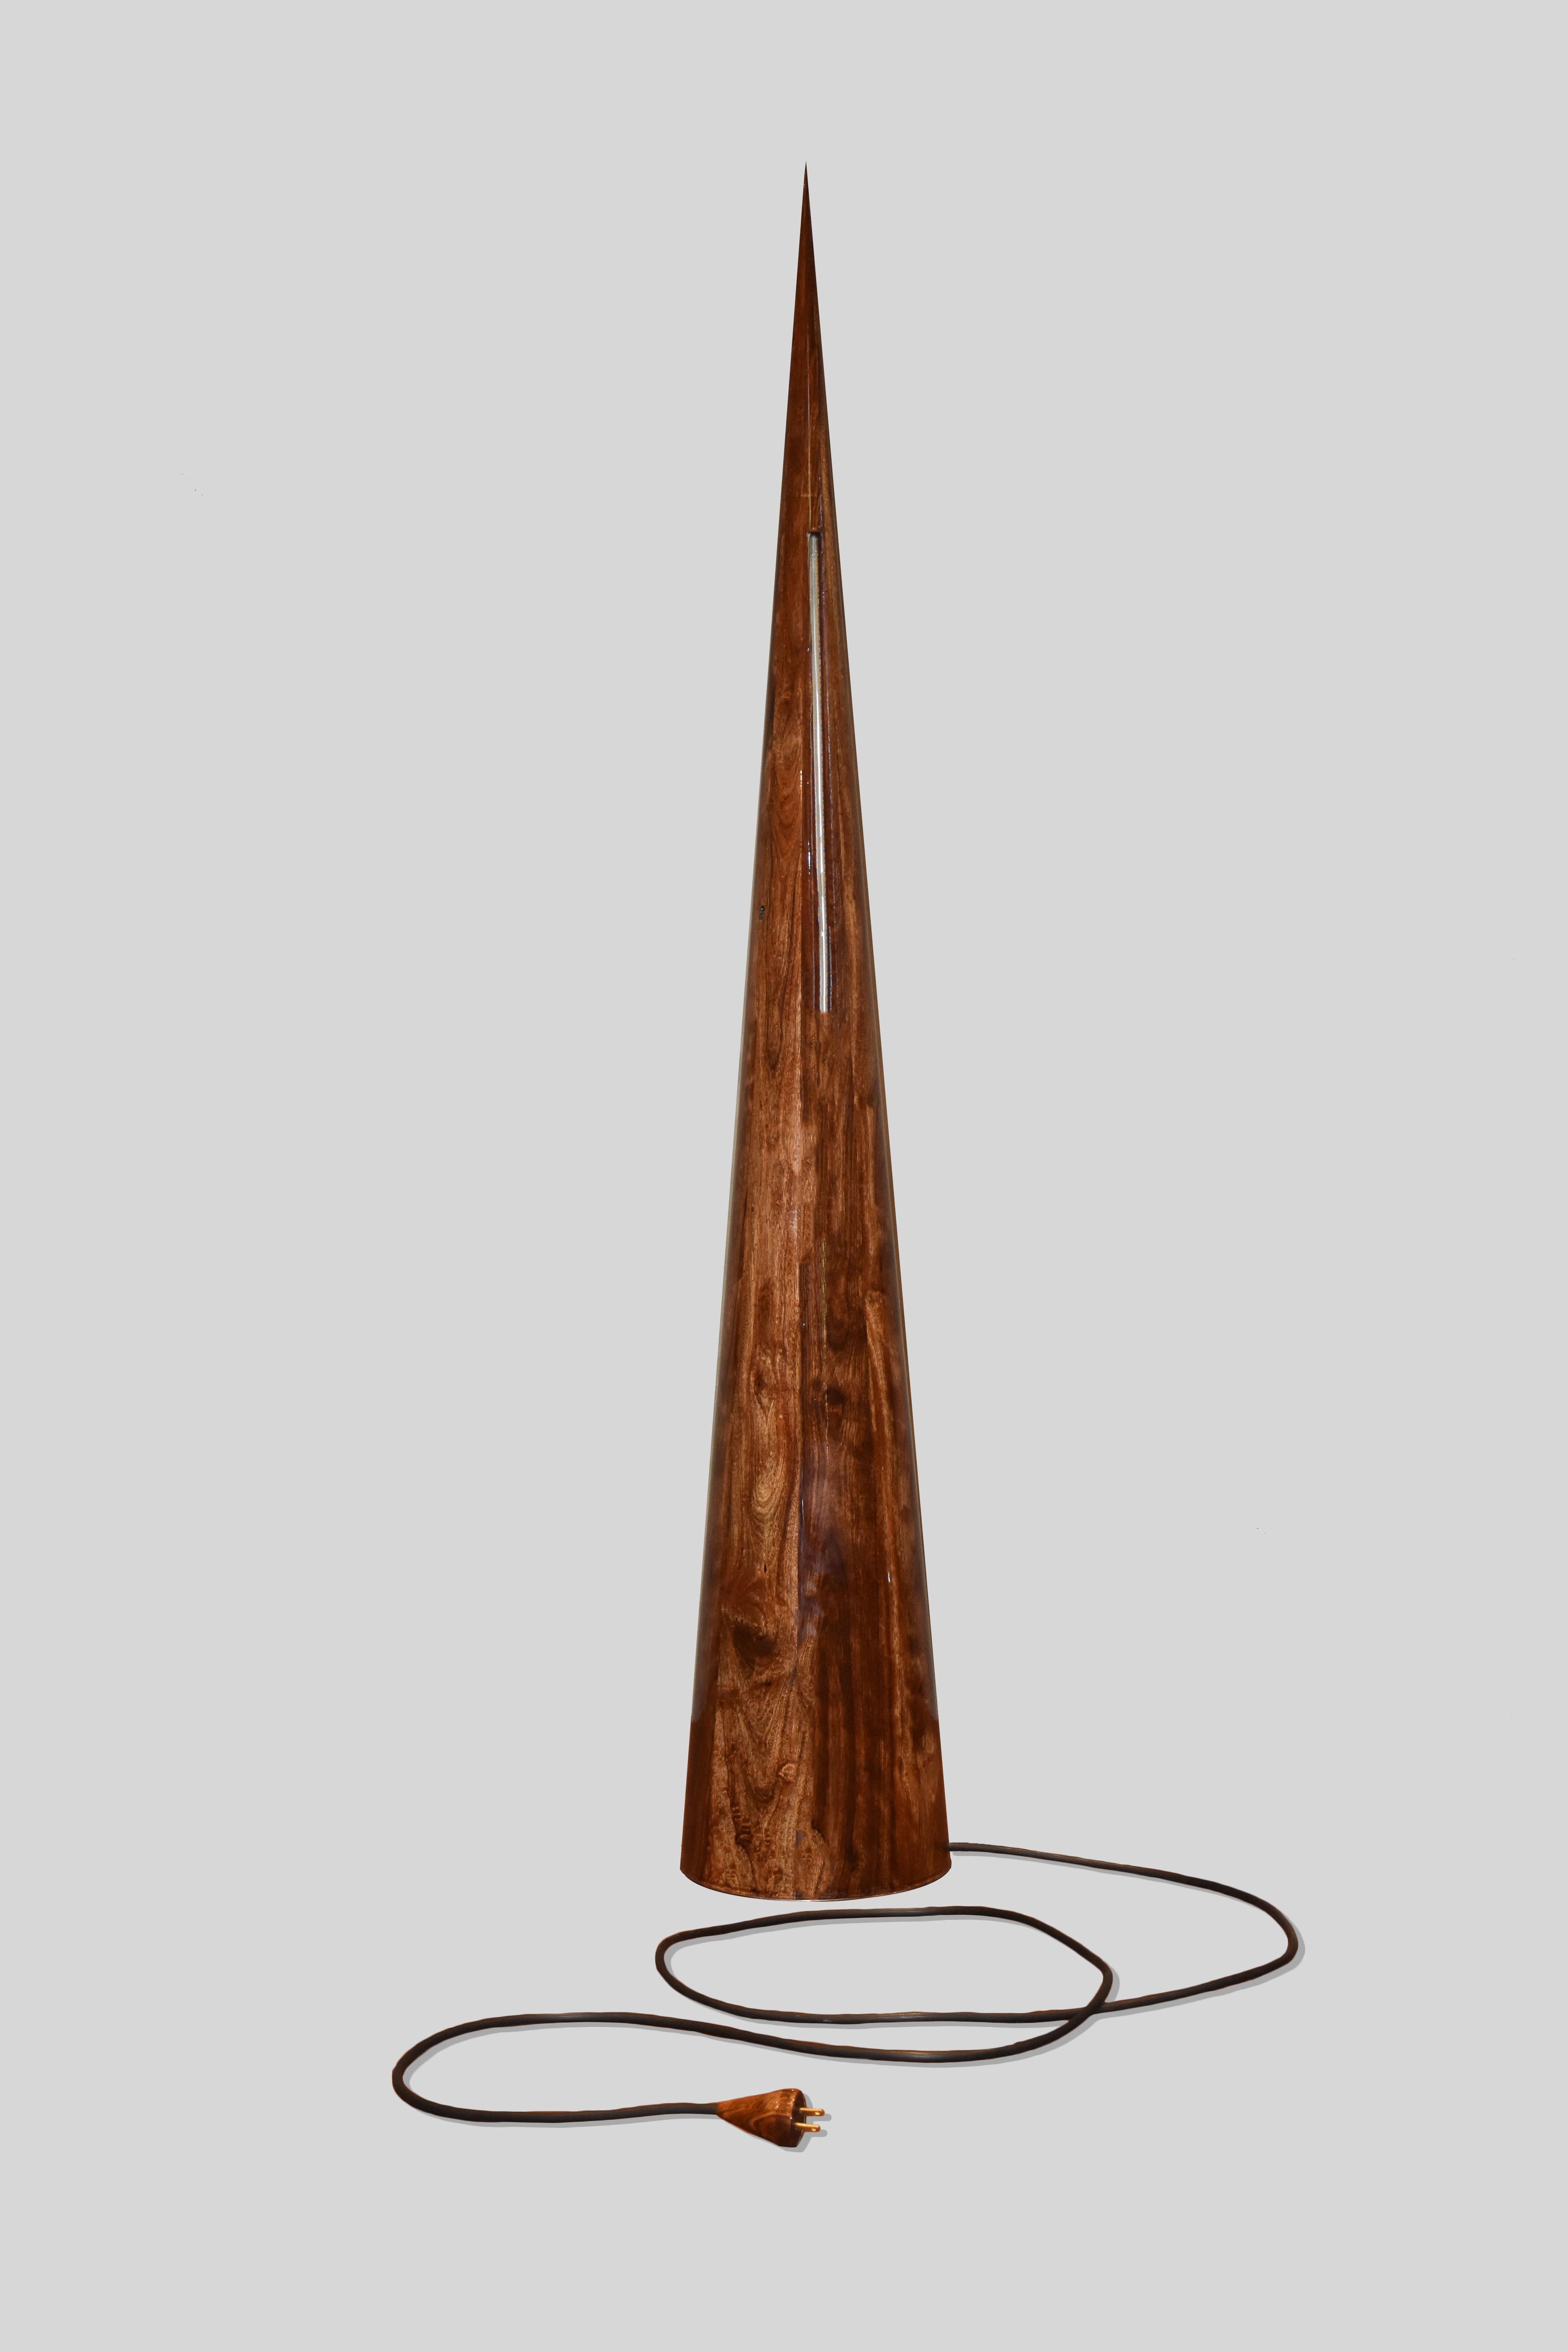 Chechen wood floor lamp by Alina Rotzinger.
Dimensions: H 25 x W 25 x D 155 cm.
Materials: Certified Chechen tropical wood, aluminum details.

Composed by Alina Rotzinger as design director and artist and Sebastian Rotzinger as industrial